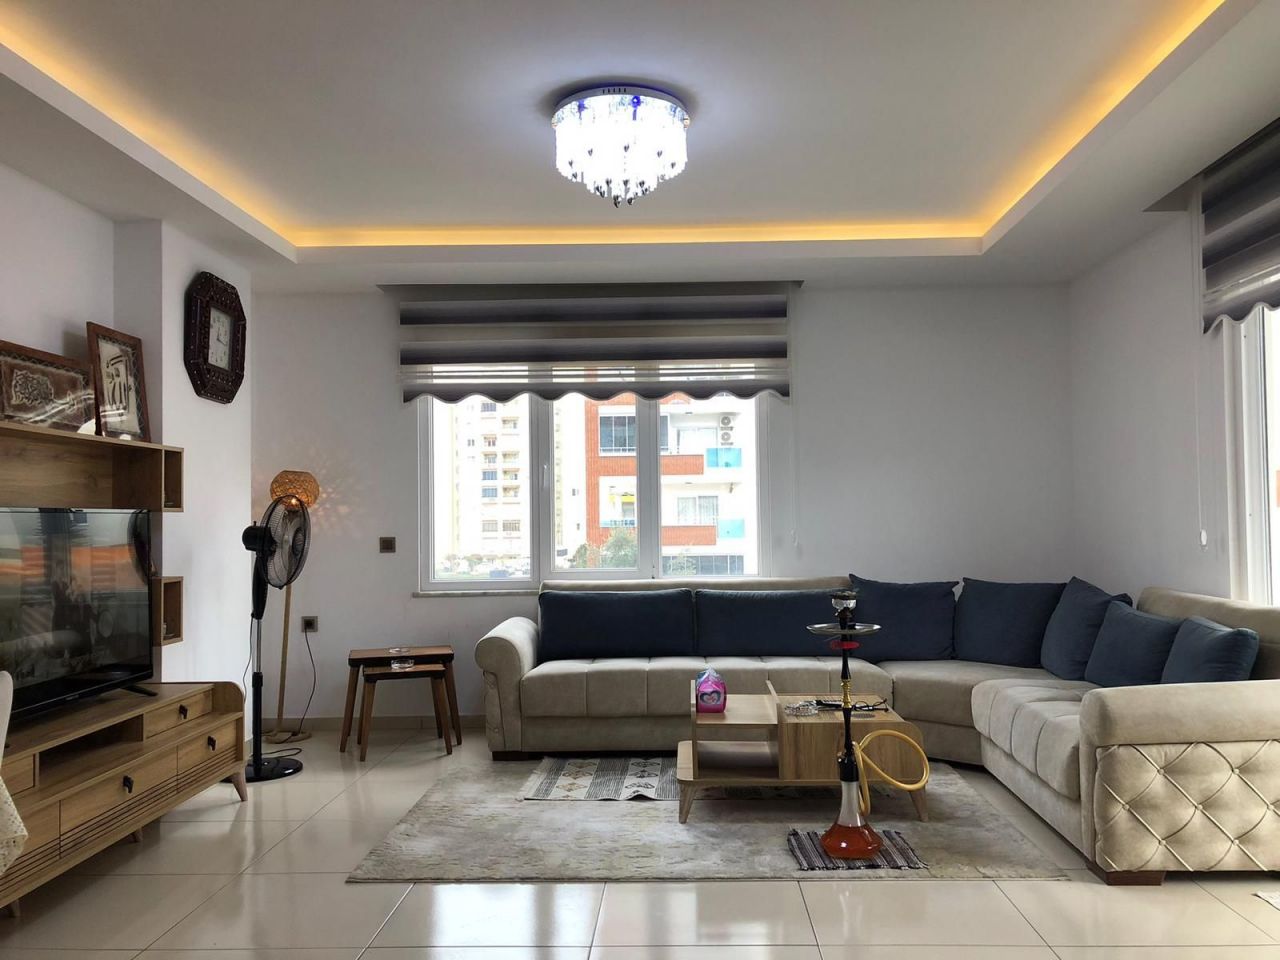 Flat in Alanya, Turkey, 110 m² - picture 1